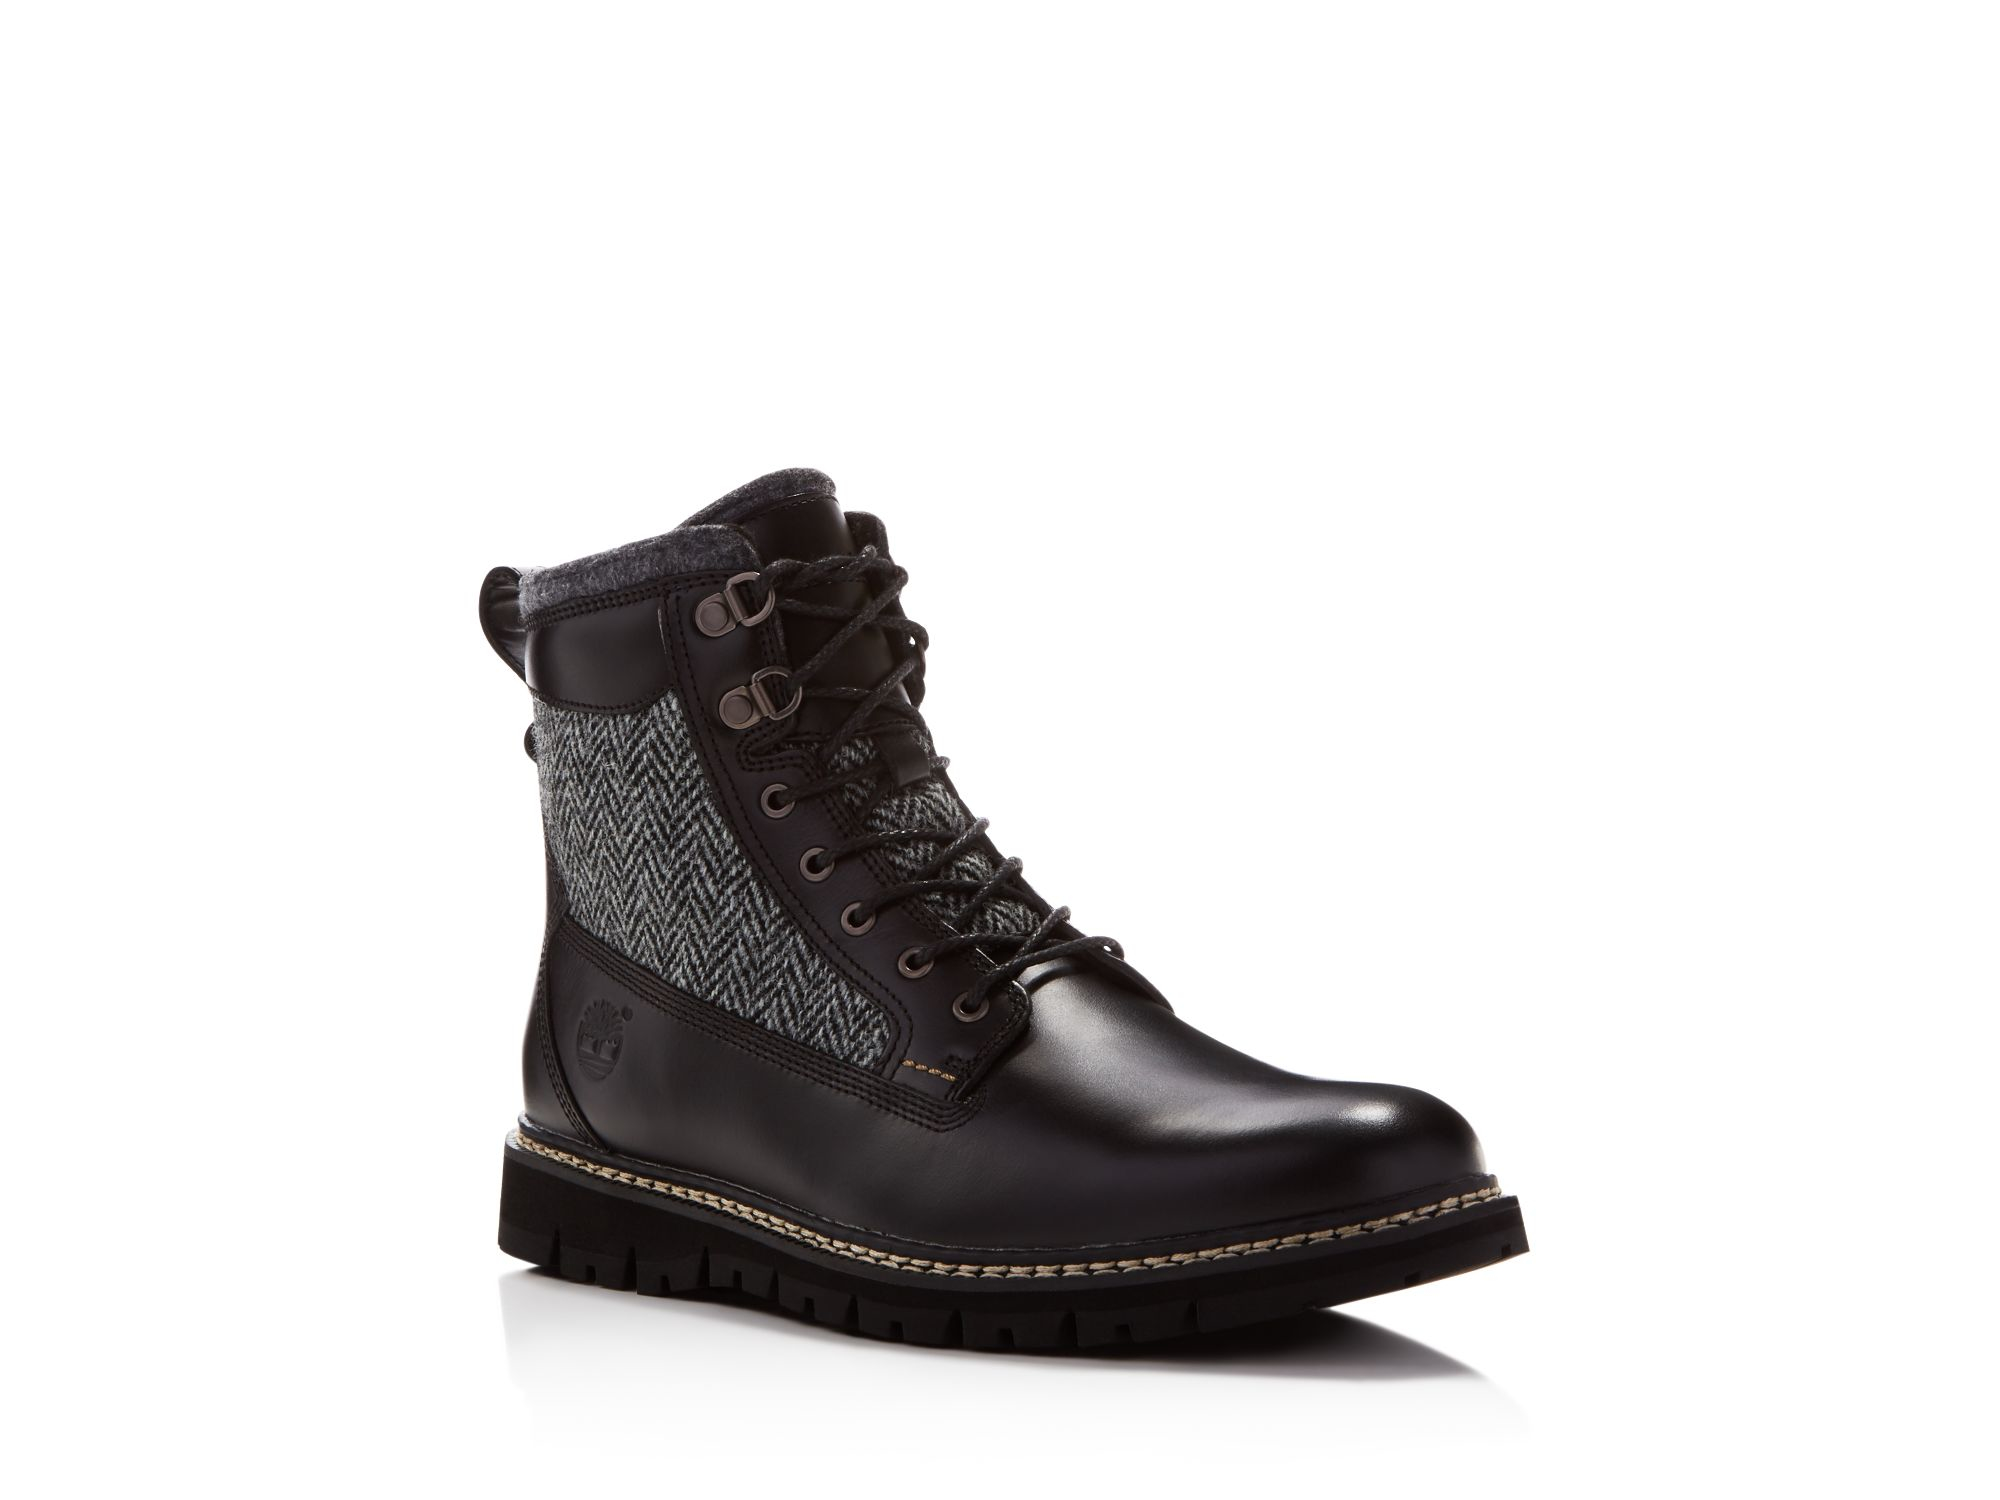 Timberland Britton Hill Harris Tweed Boots in Black - Lyst